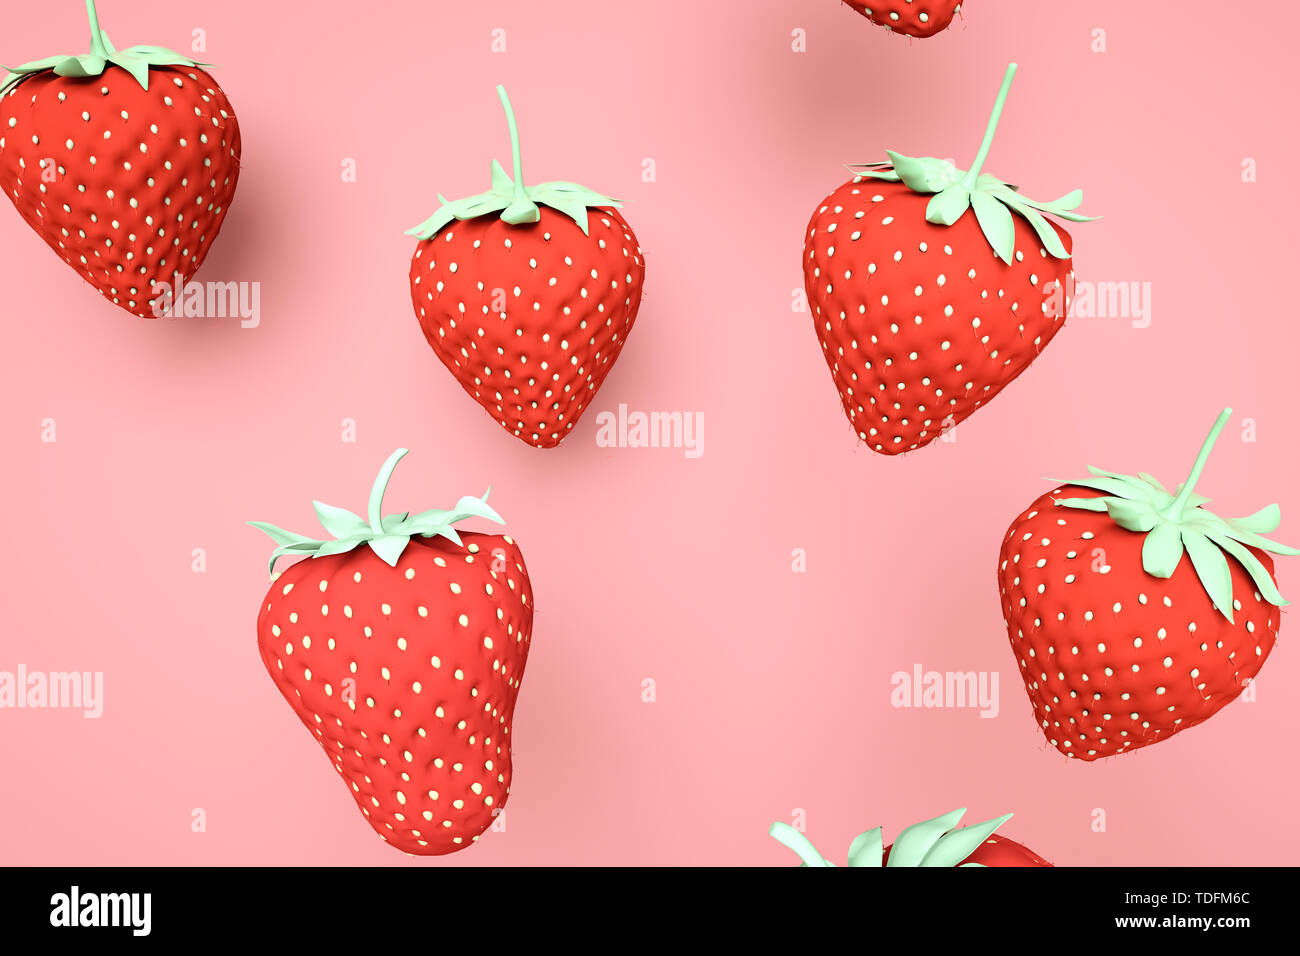 Repeated strawberries placed under the soft pink background of maiden color, sweet juicy strawberries, healthy nutrition and weight loss fruit, hot summer thirst-quenching cool fruit, juice color series, love maiden color. Stock Photo